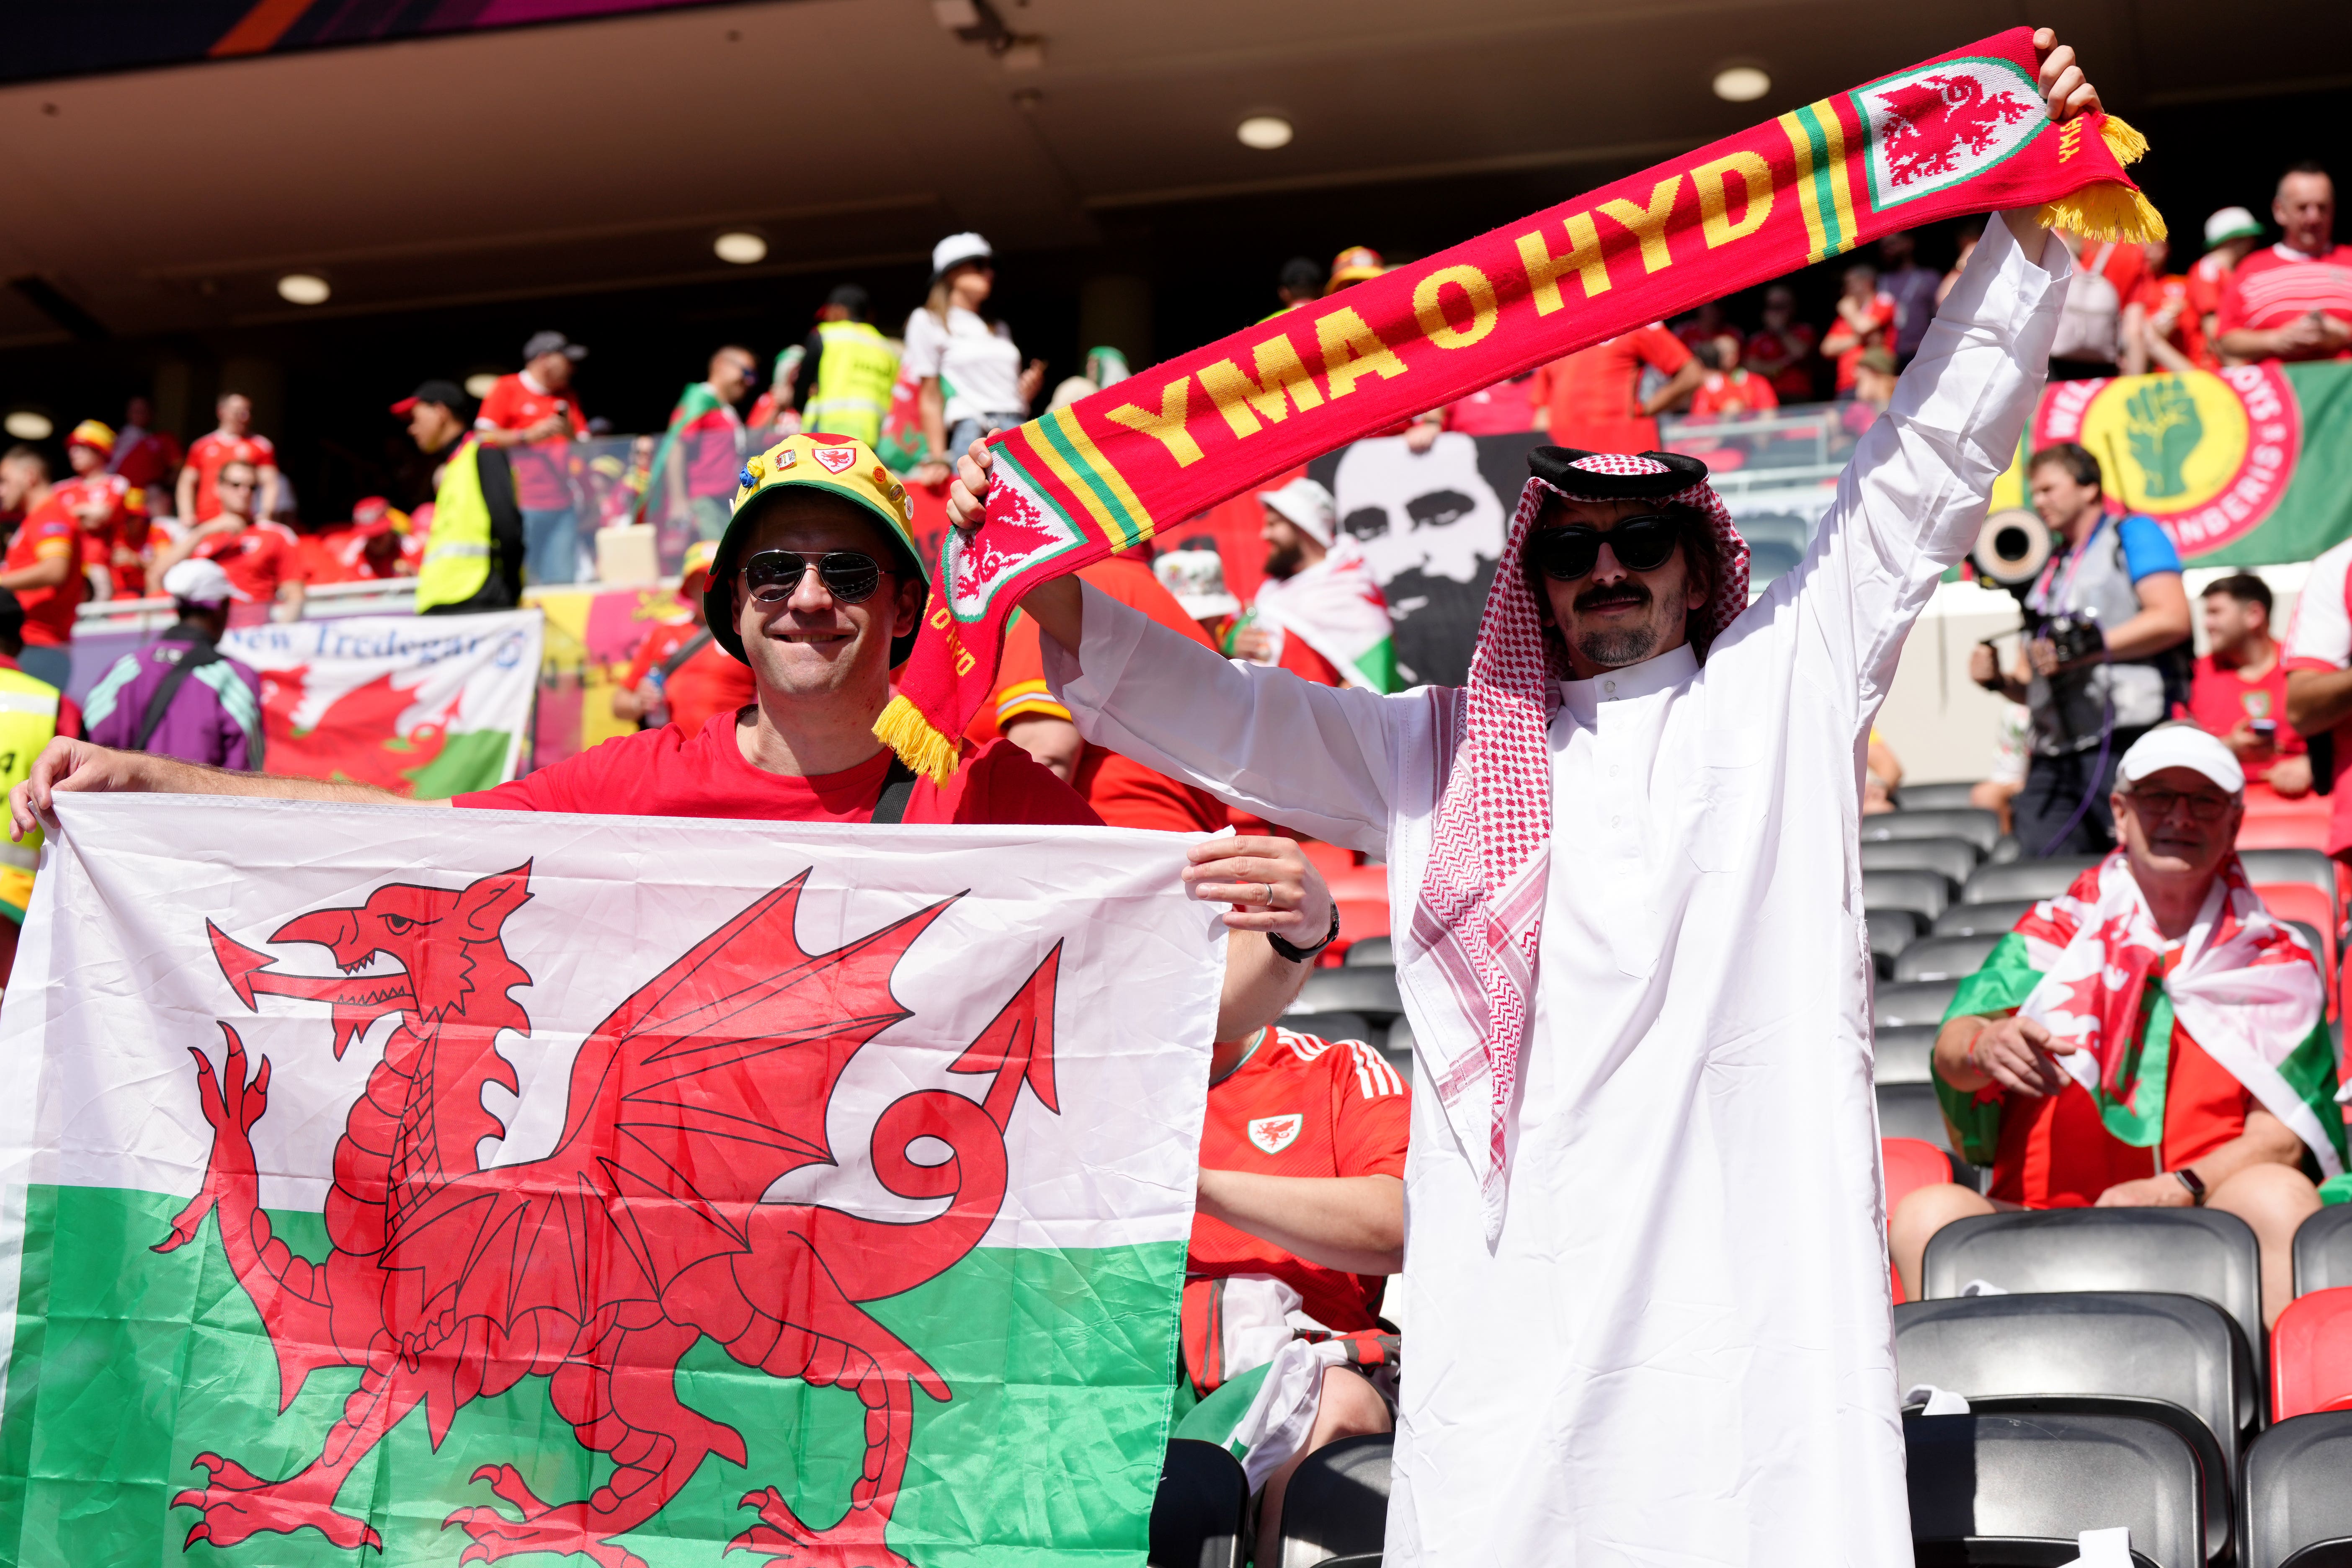 Wales fans show their support prior to the FIFA World Cup Group B match at the Ahmad Bin Ali Stadium, Al-Rayyan (Nick Potts/PA)